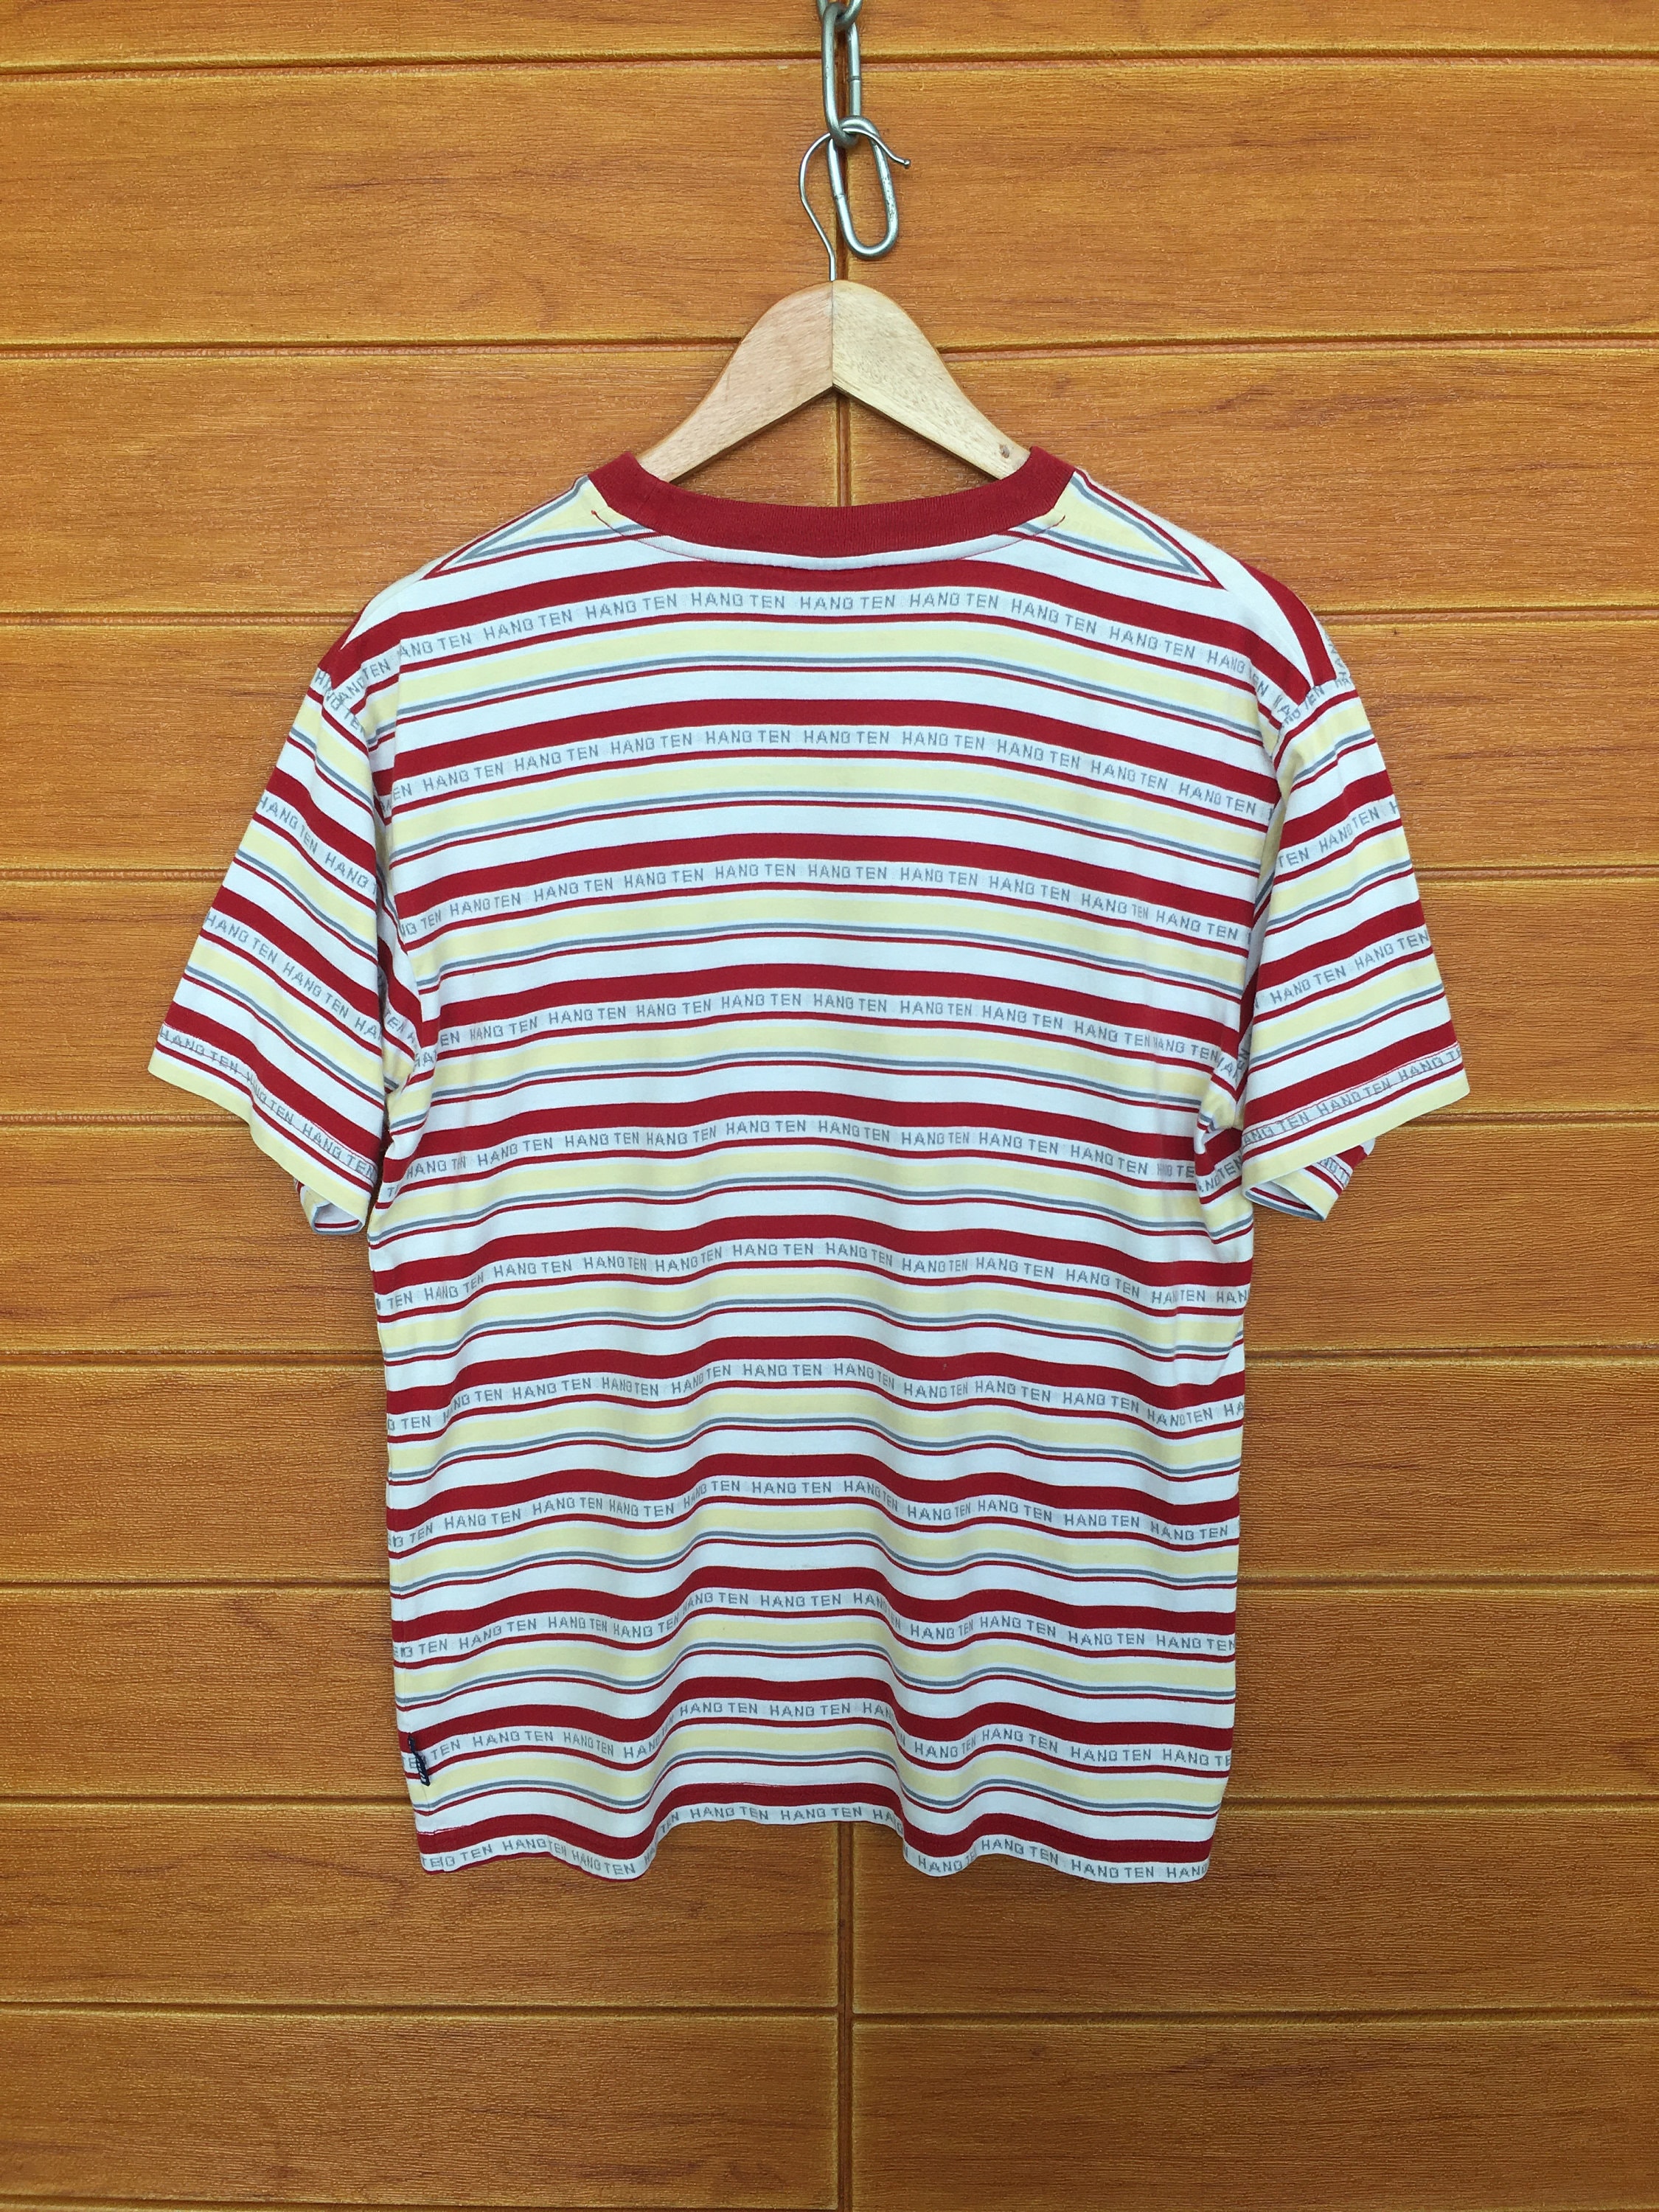 Vintage s Hang Ten Striped T shirt / Rockabilly / Surf Style   Etsy